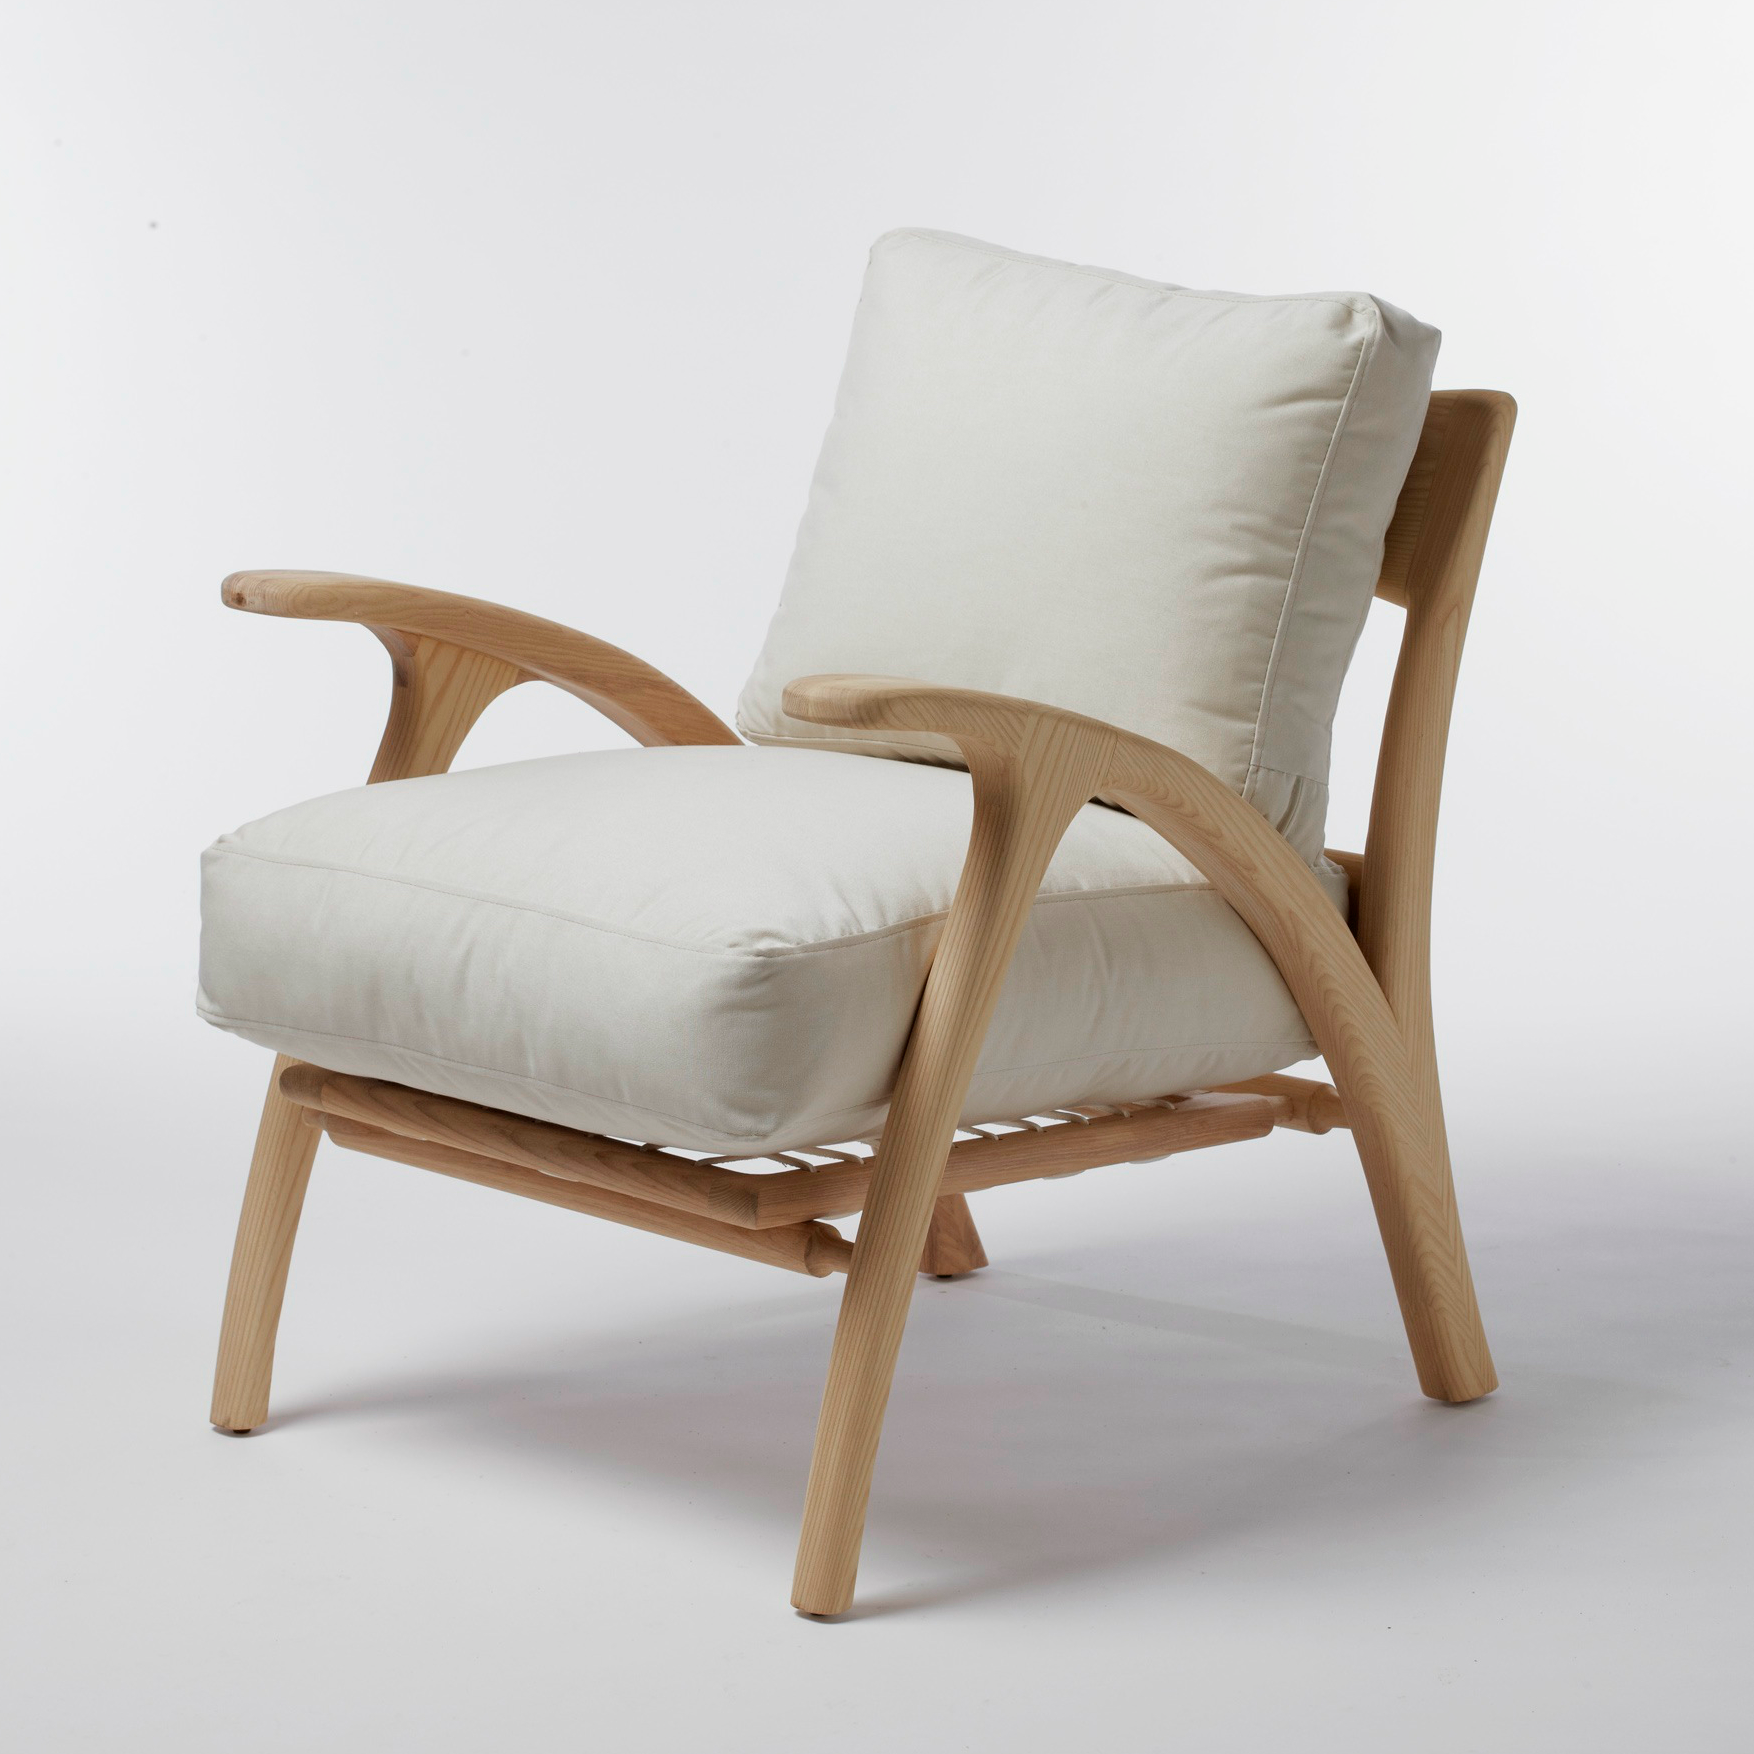 Umthi Arm Chair by Meyer Von Wielligh. Inspired by the organic lines of tree branches, the design of the Umthi range (meaning tree in Xhosa) is focused on the materials and allows the wood to dictate its natural form.